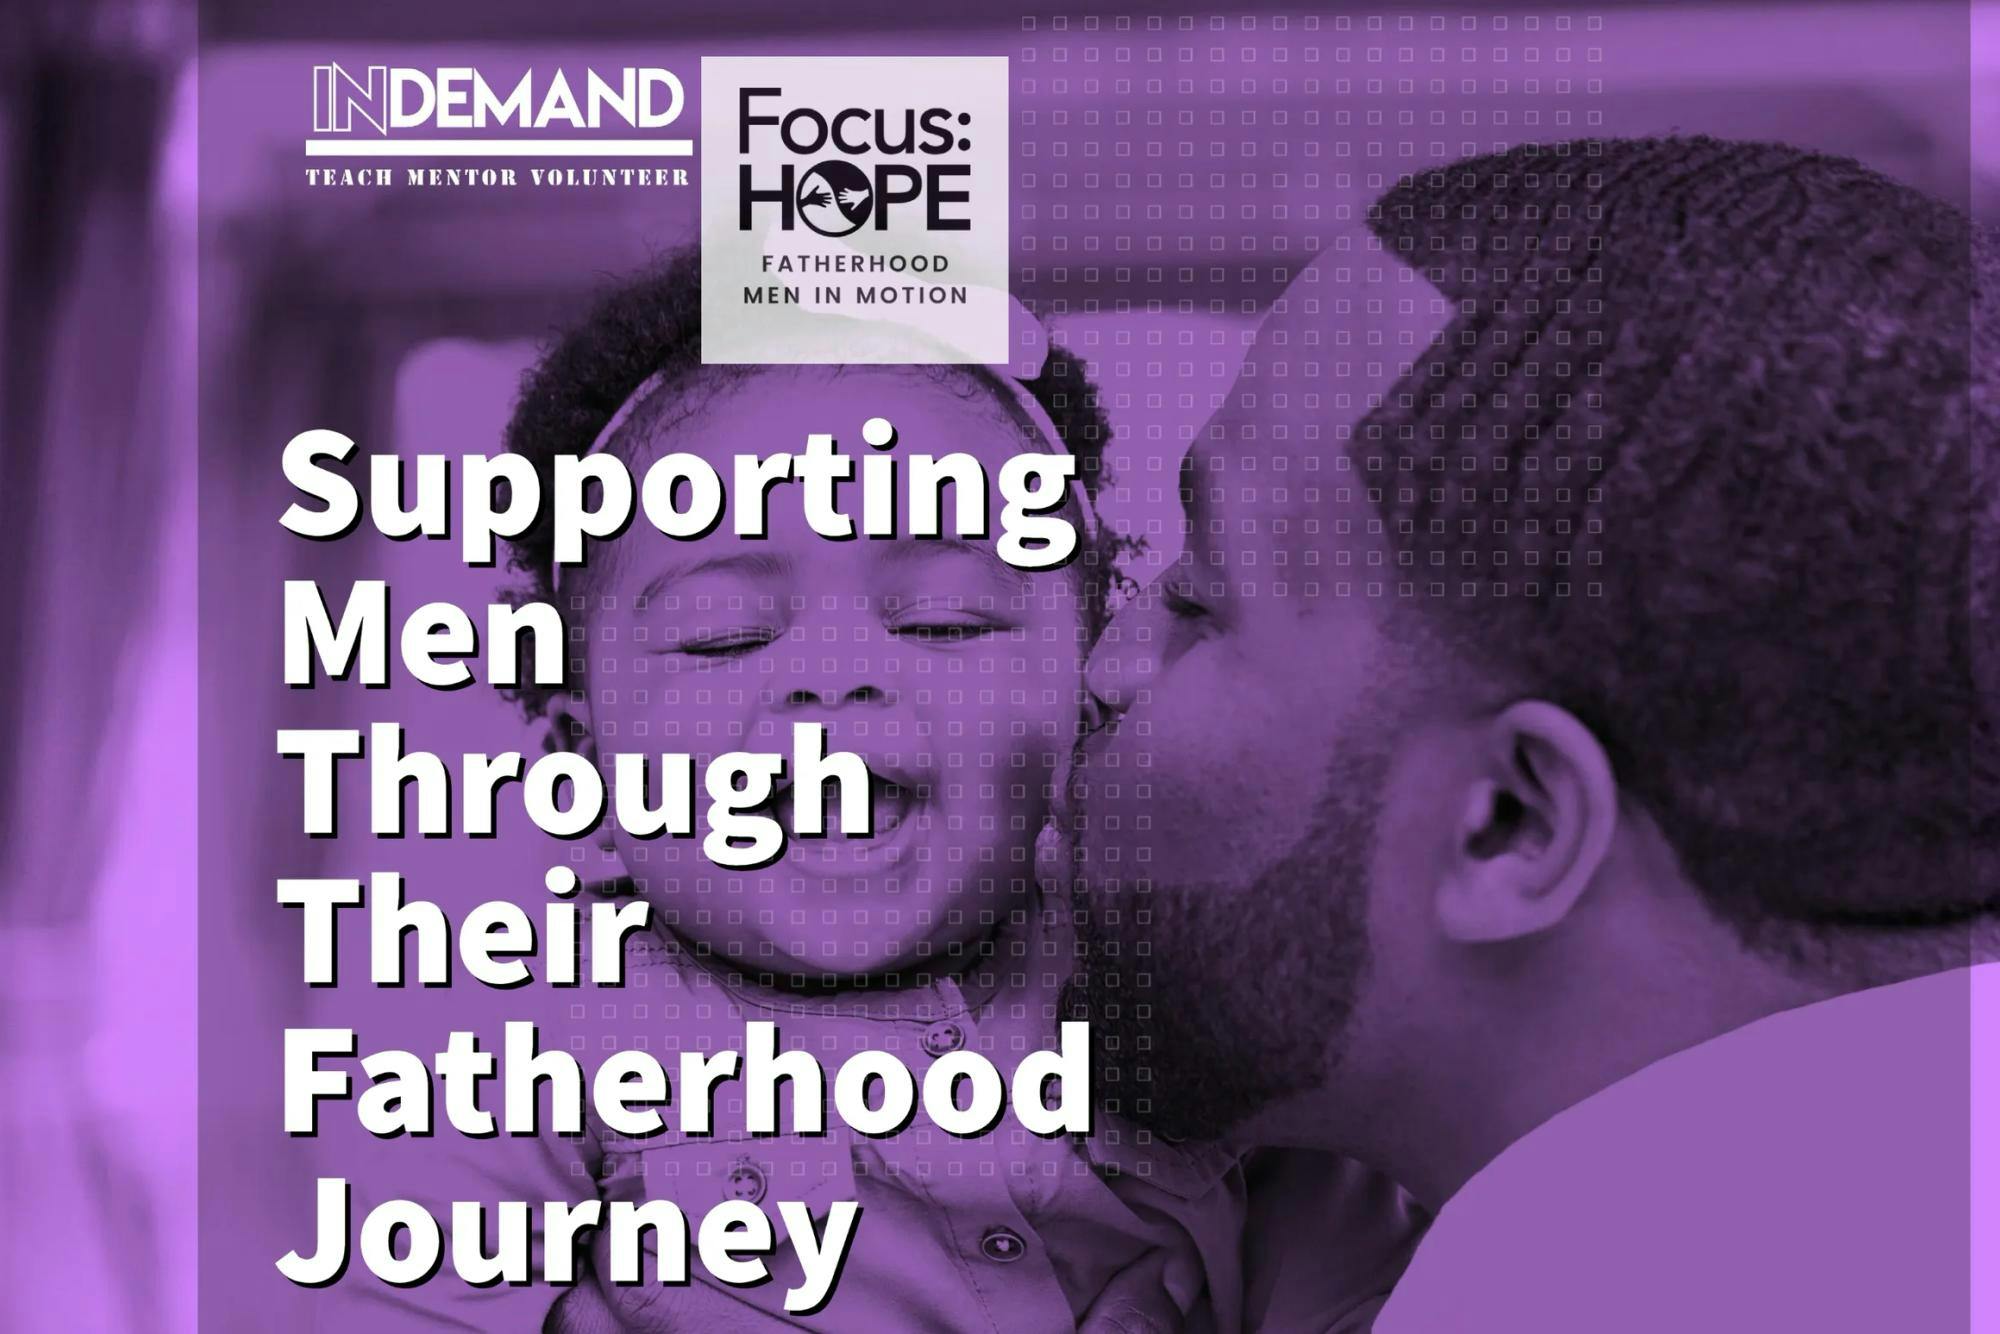 Cover Image for MEN IN MOTION: FATHERHOOD INITATIVE